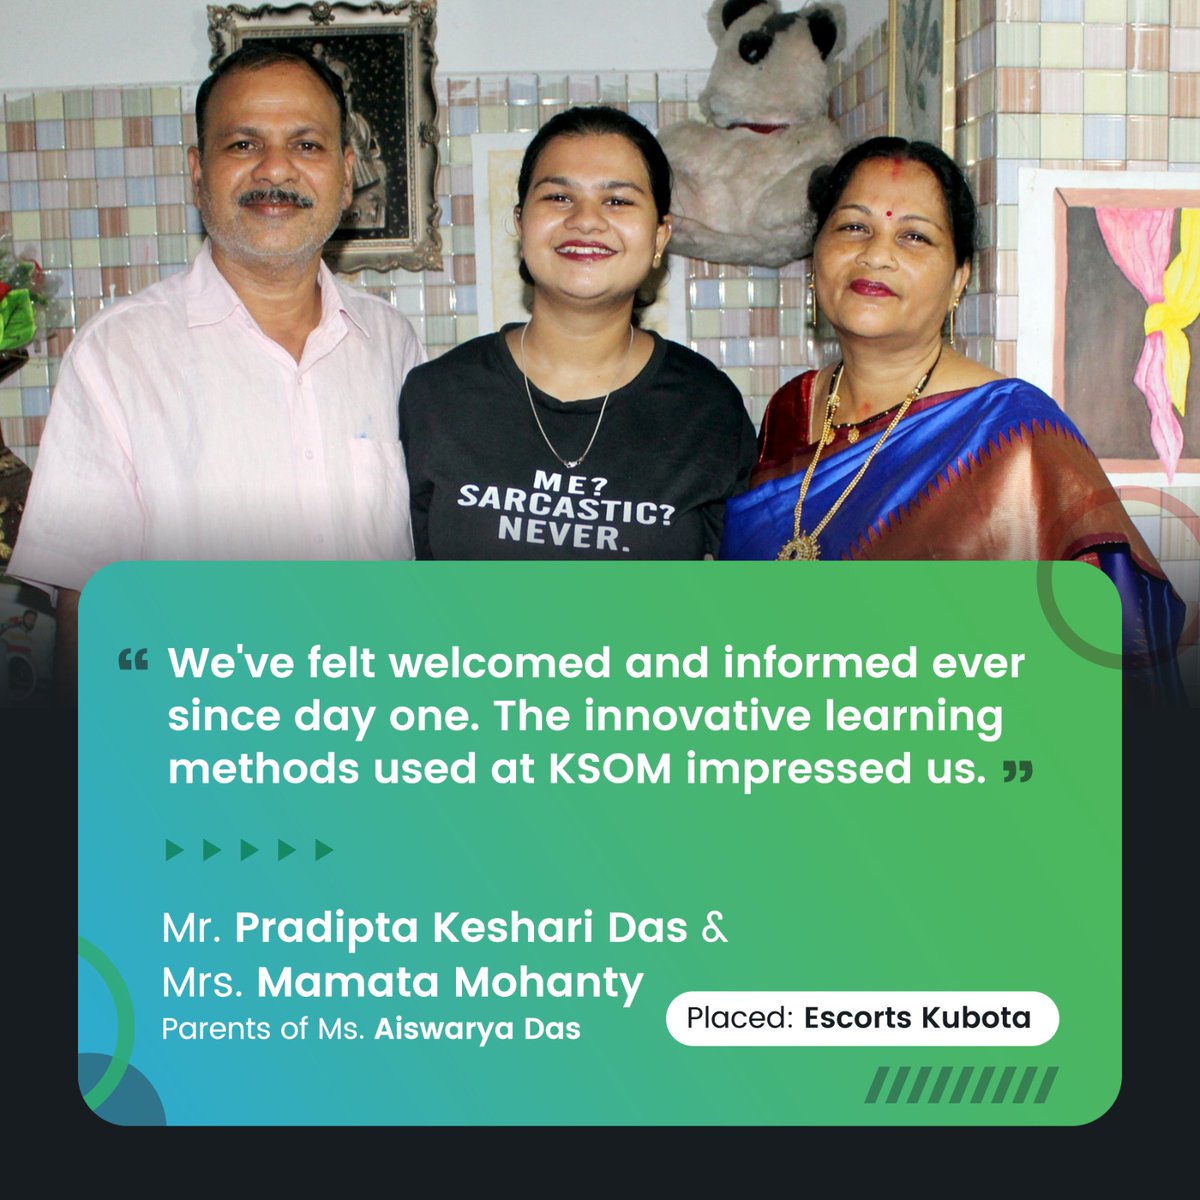 Mr. Pradipta Keshari Das & Mrs. Mamata  Mohanty, parents of Aiswarya Das acknowledge KSOM's efforts in guiding and assisting their daughter with her chosen career path.

We congratulate Aiswarya Das on her placement!

#ksombbsr #parenttestimonials #kiitmba #MBA #supermba #mbalife…